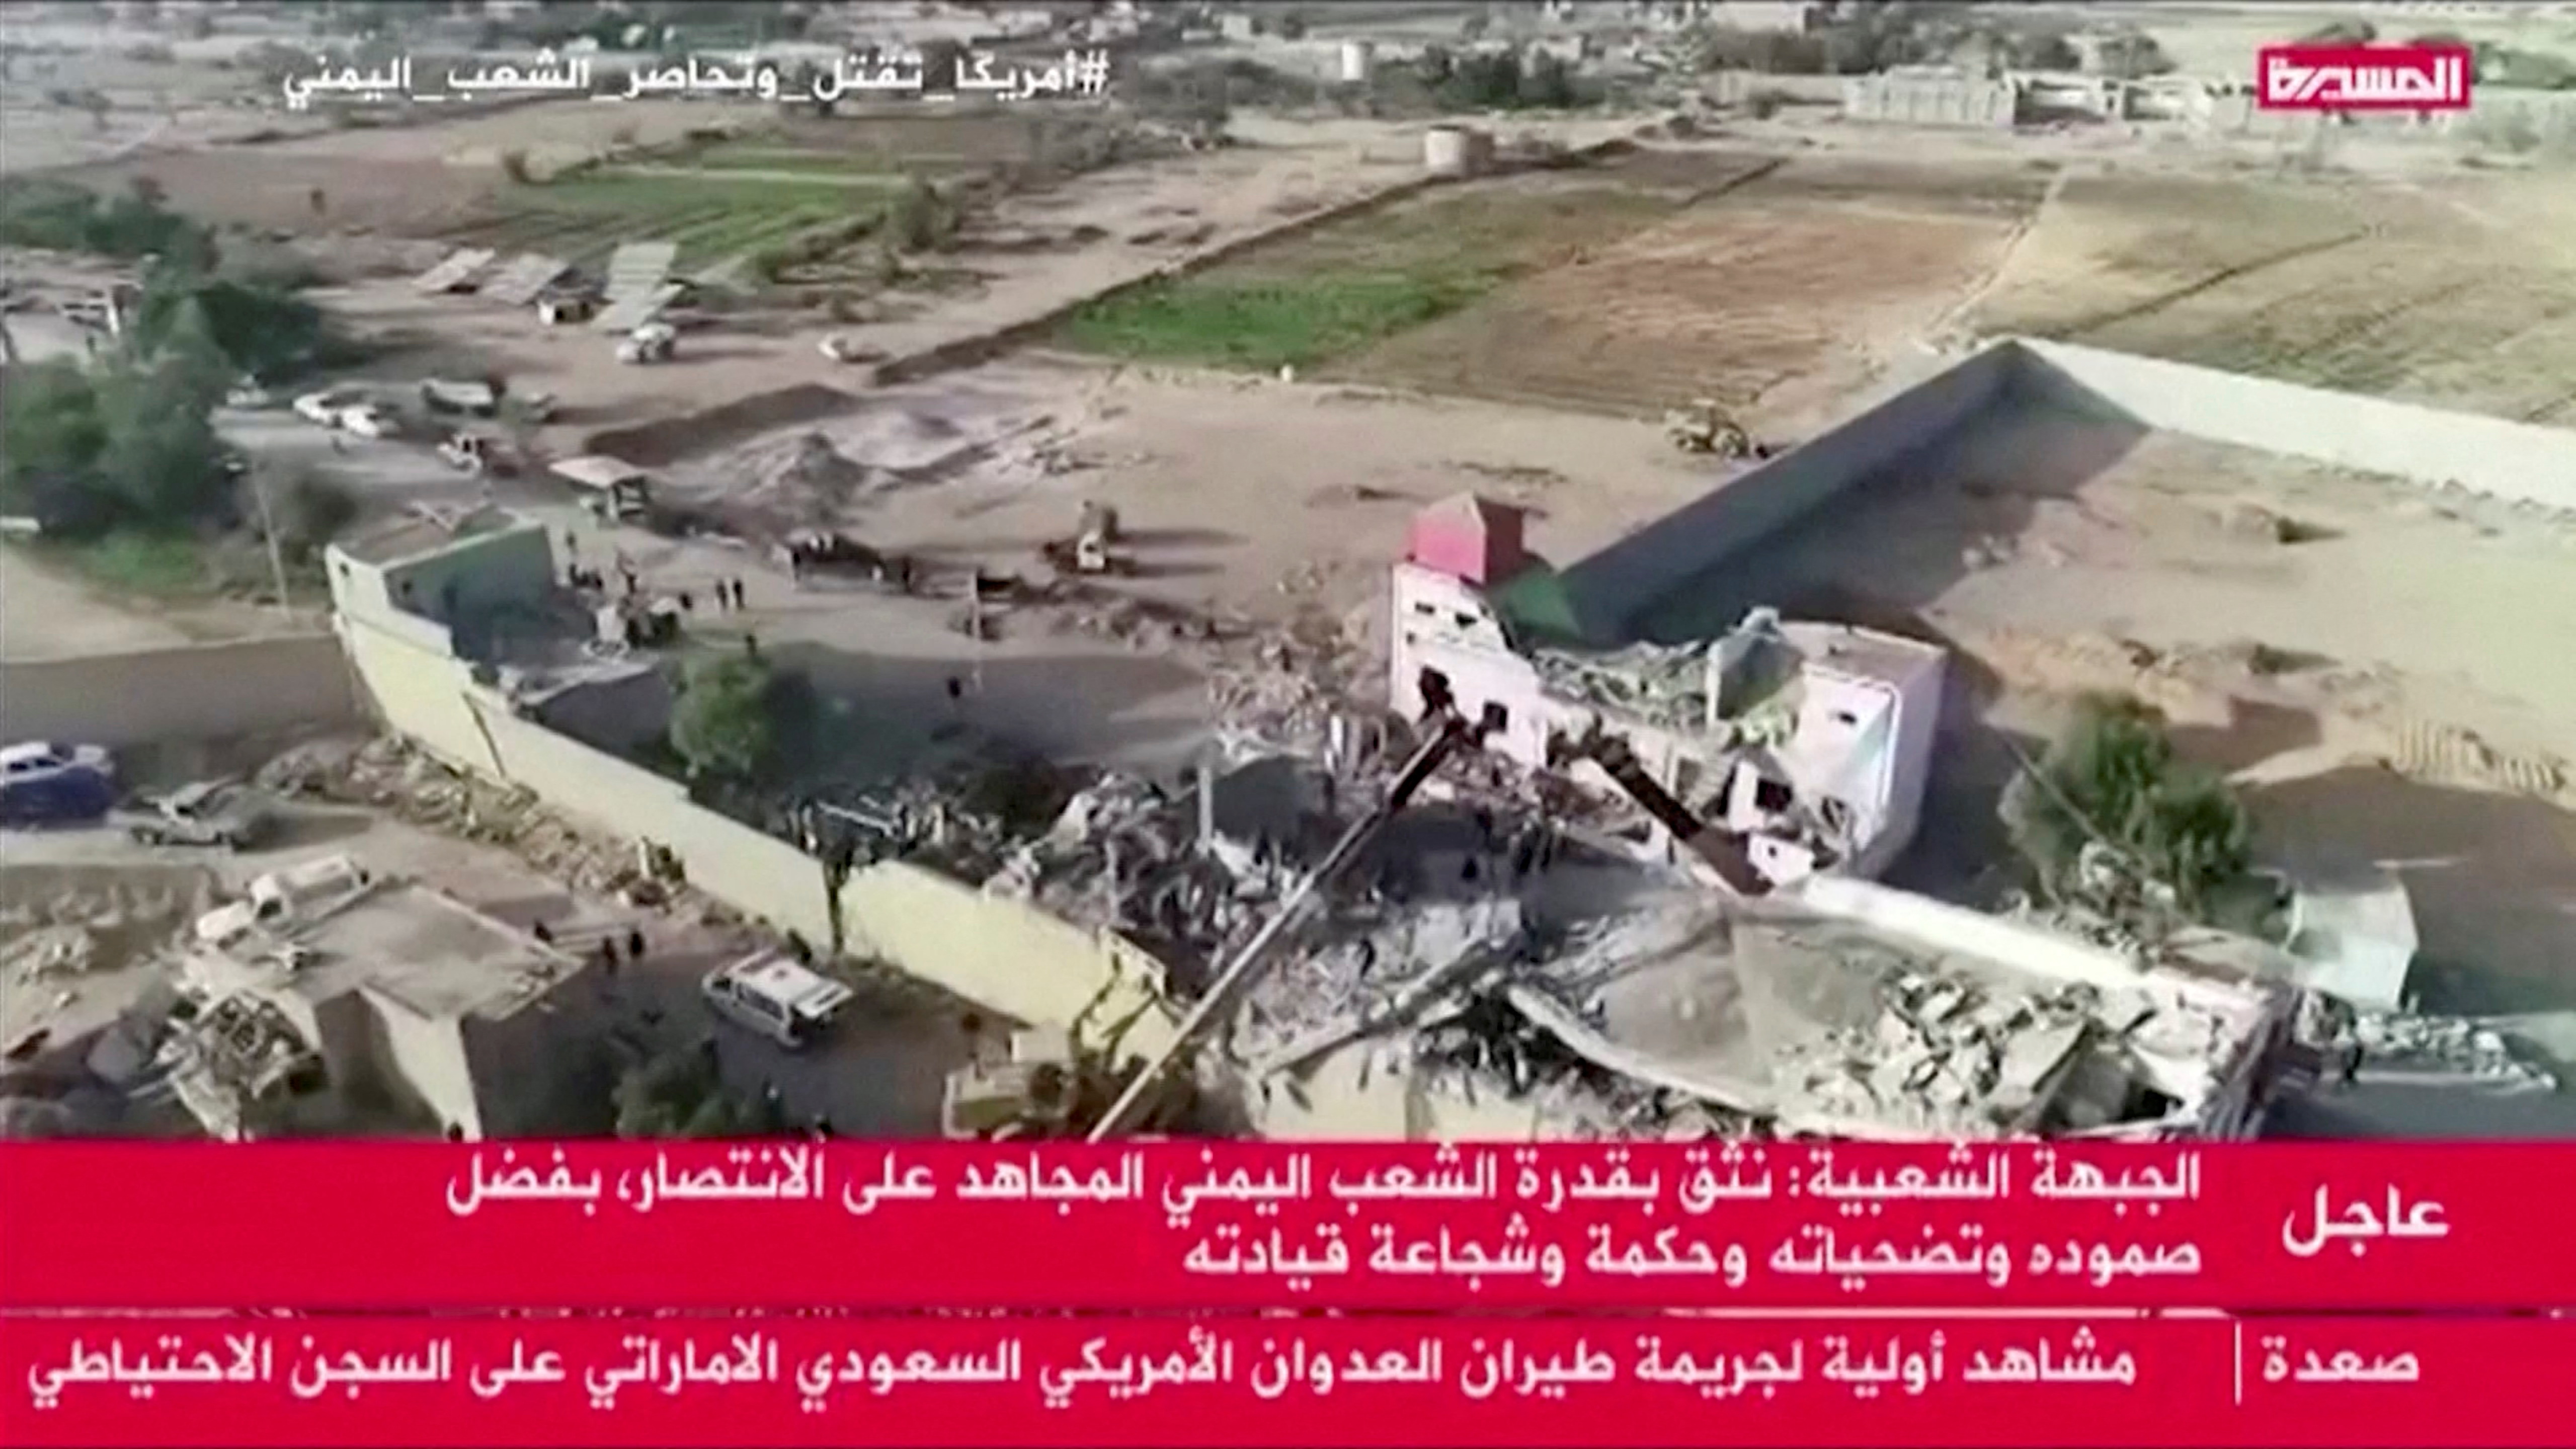 Scenes after airstrike on detention centre in Saada